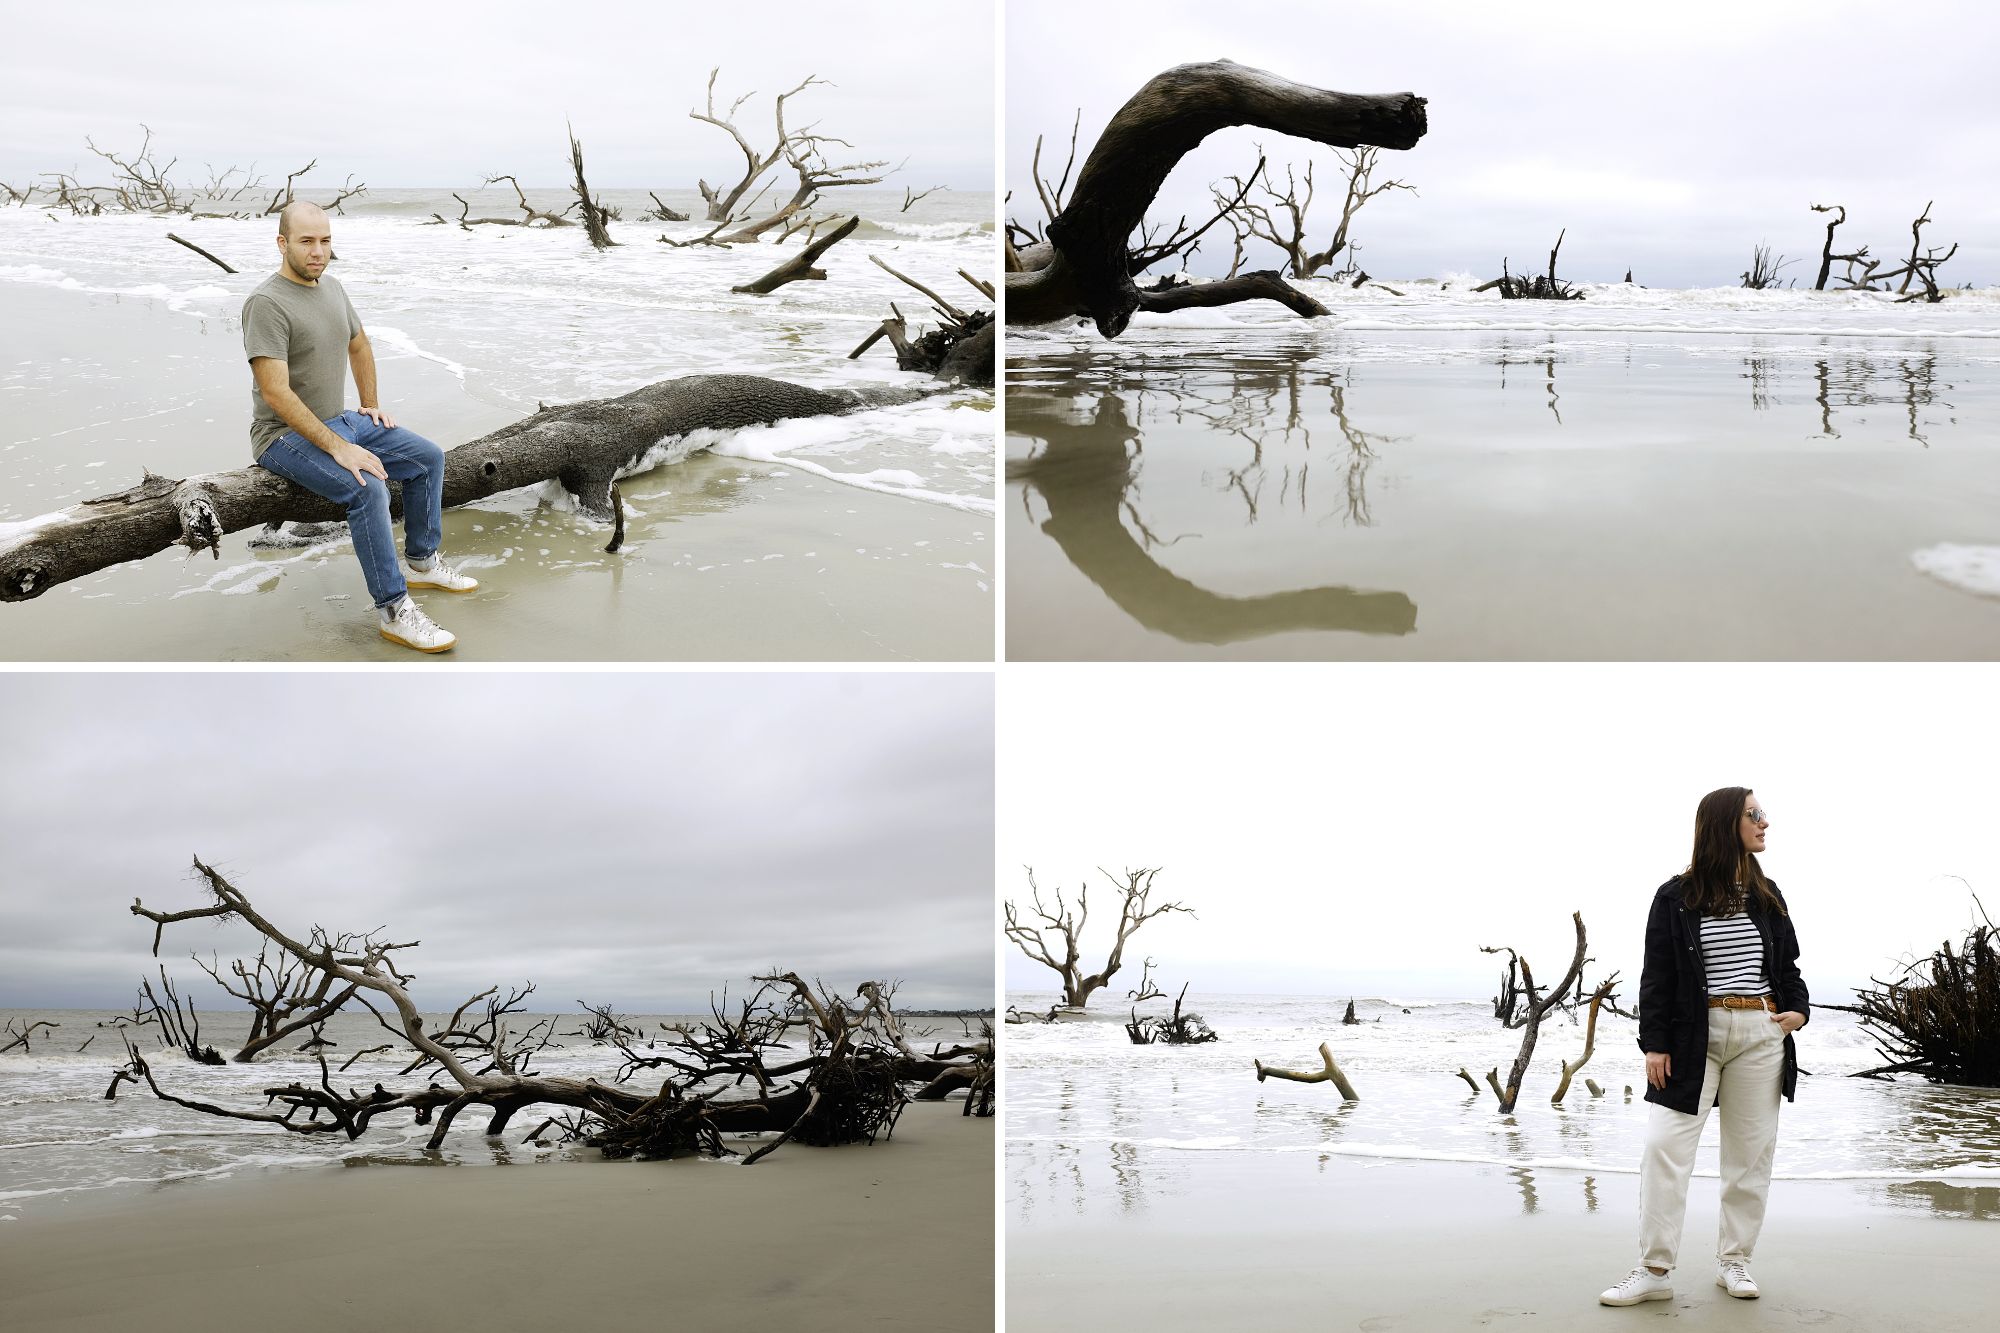 Collage of images at Hunting Island State Park's Boneyard Beach